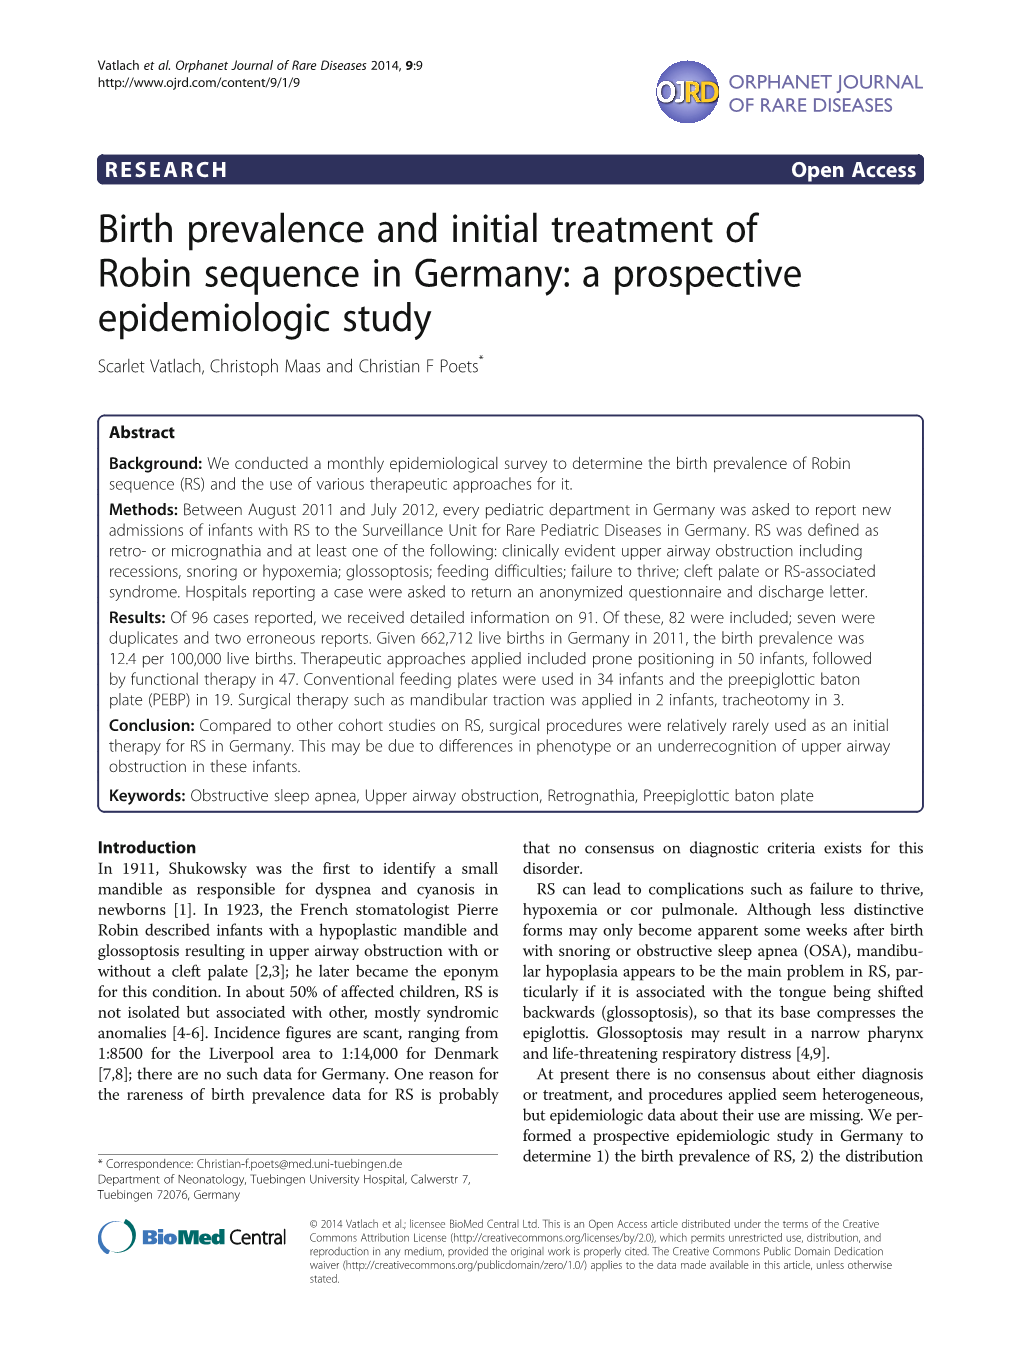 Birth Prevalence and Initial Treatment of Robin Sequence in Germany: a Prospective Epidemiologic Study Scarlet Vatlach, Christoph Maas and Christian F Poets*